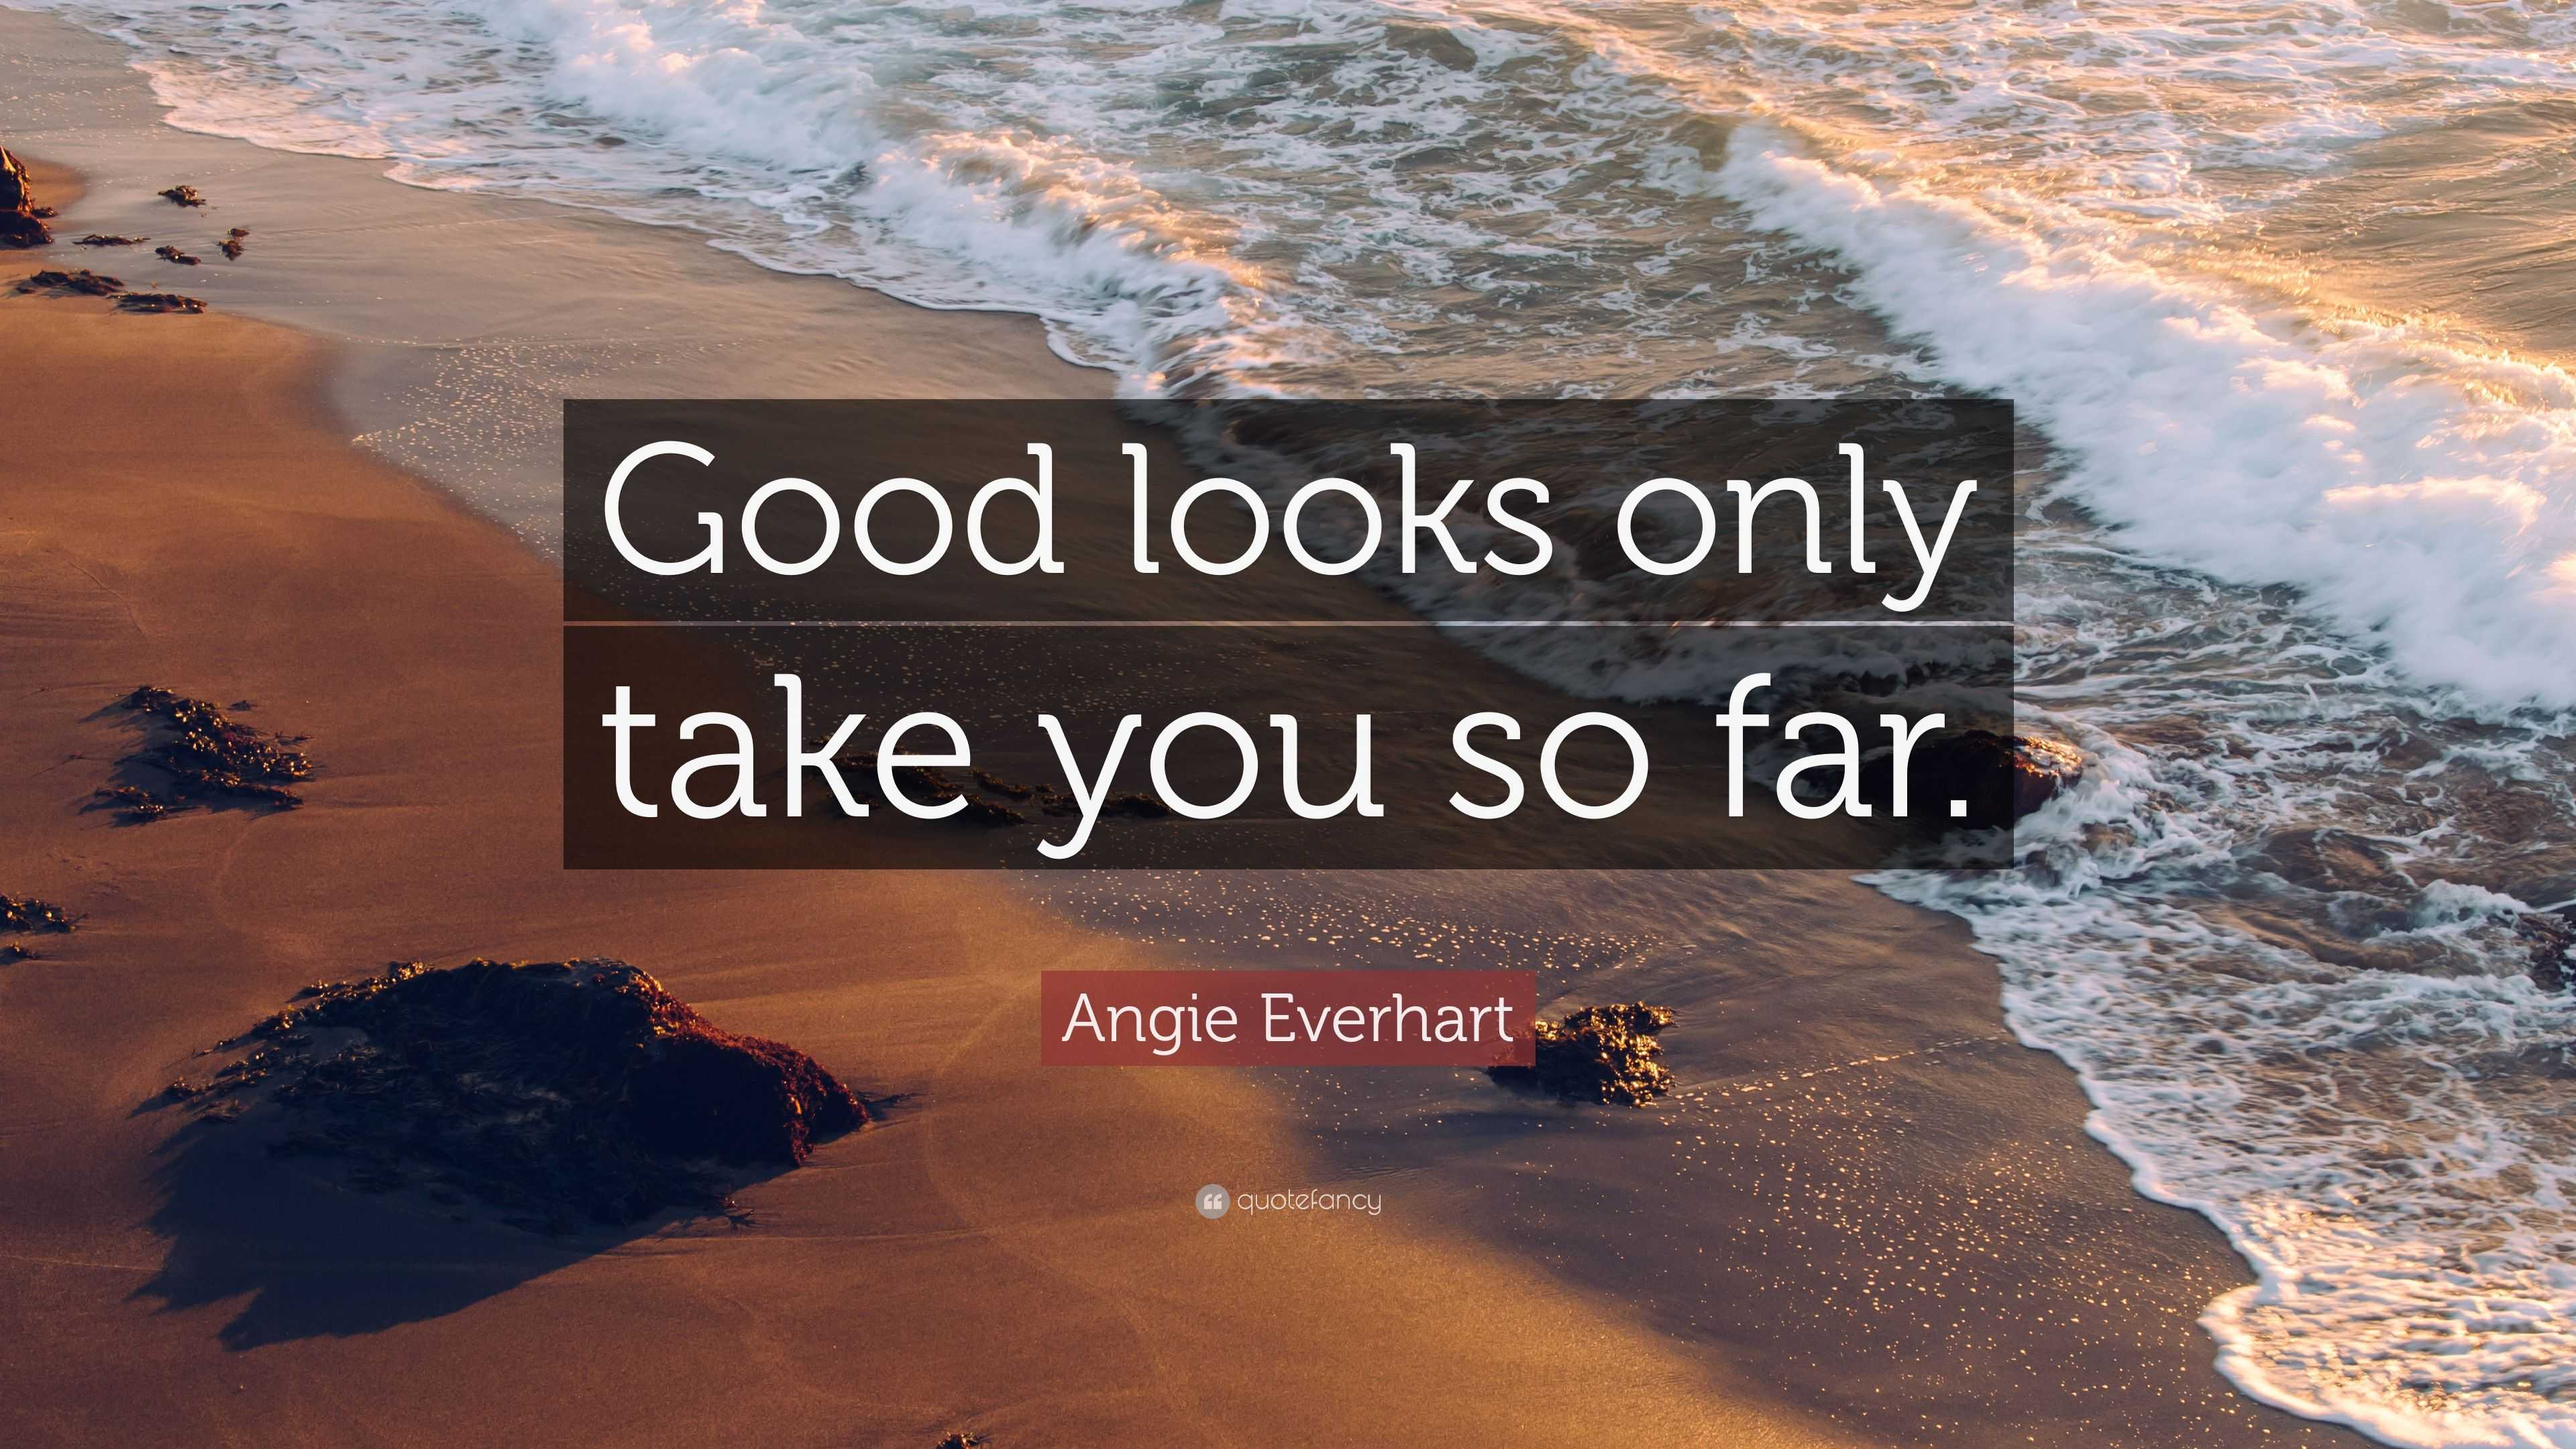 Angie Everhart Quote: “Good looks only take you so far.”